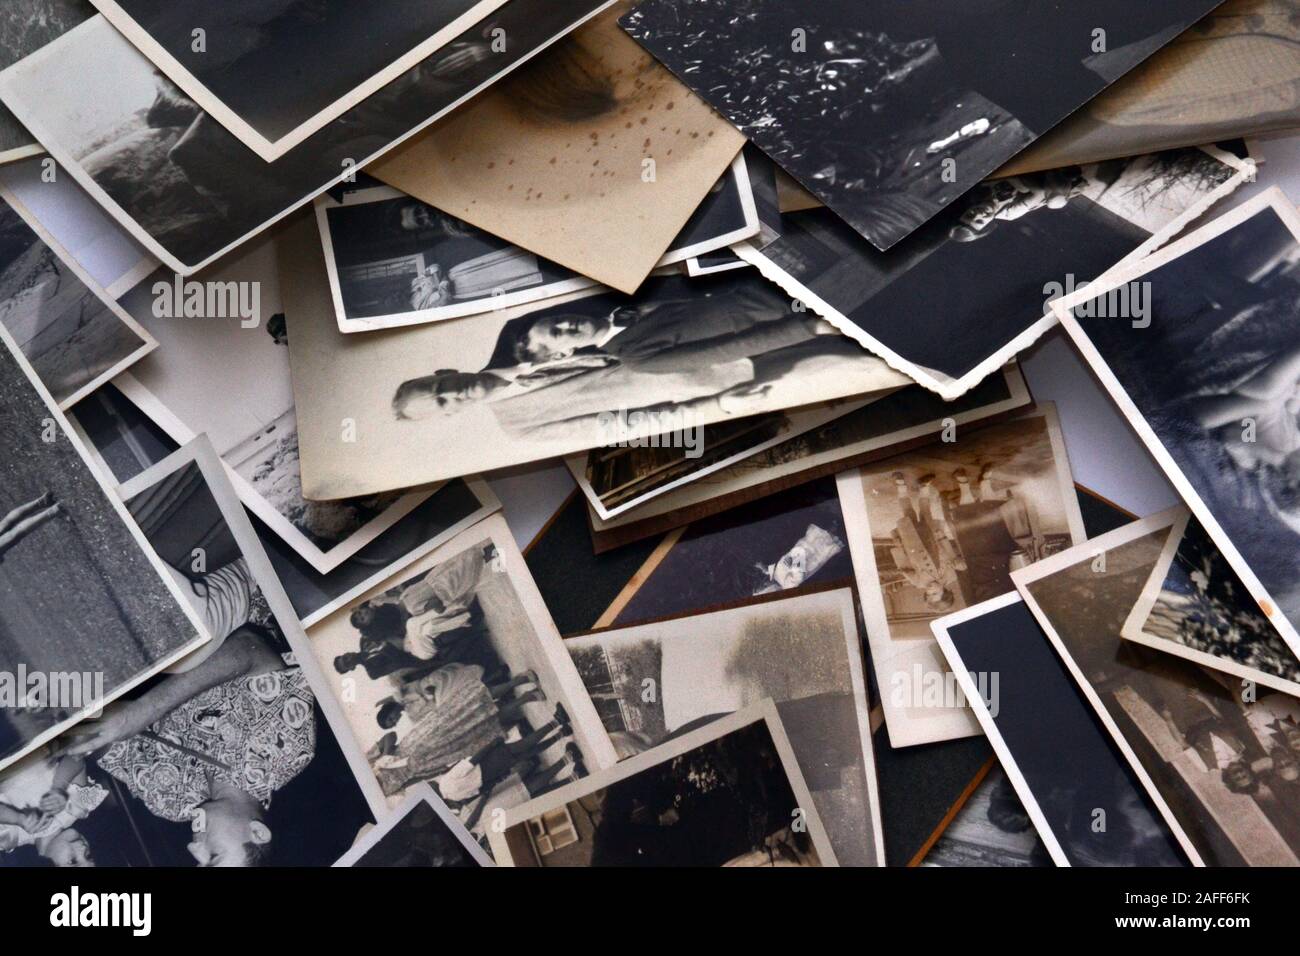 A collection of old, vintage black and white family photographic prints Stock Photo